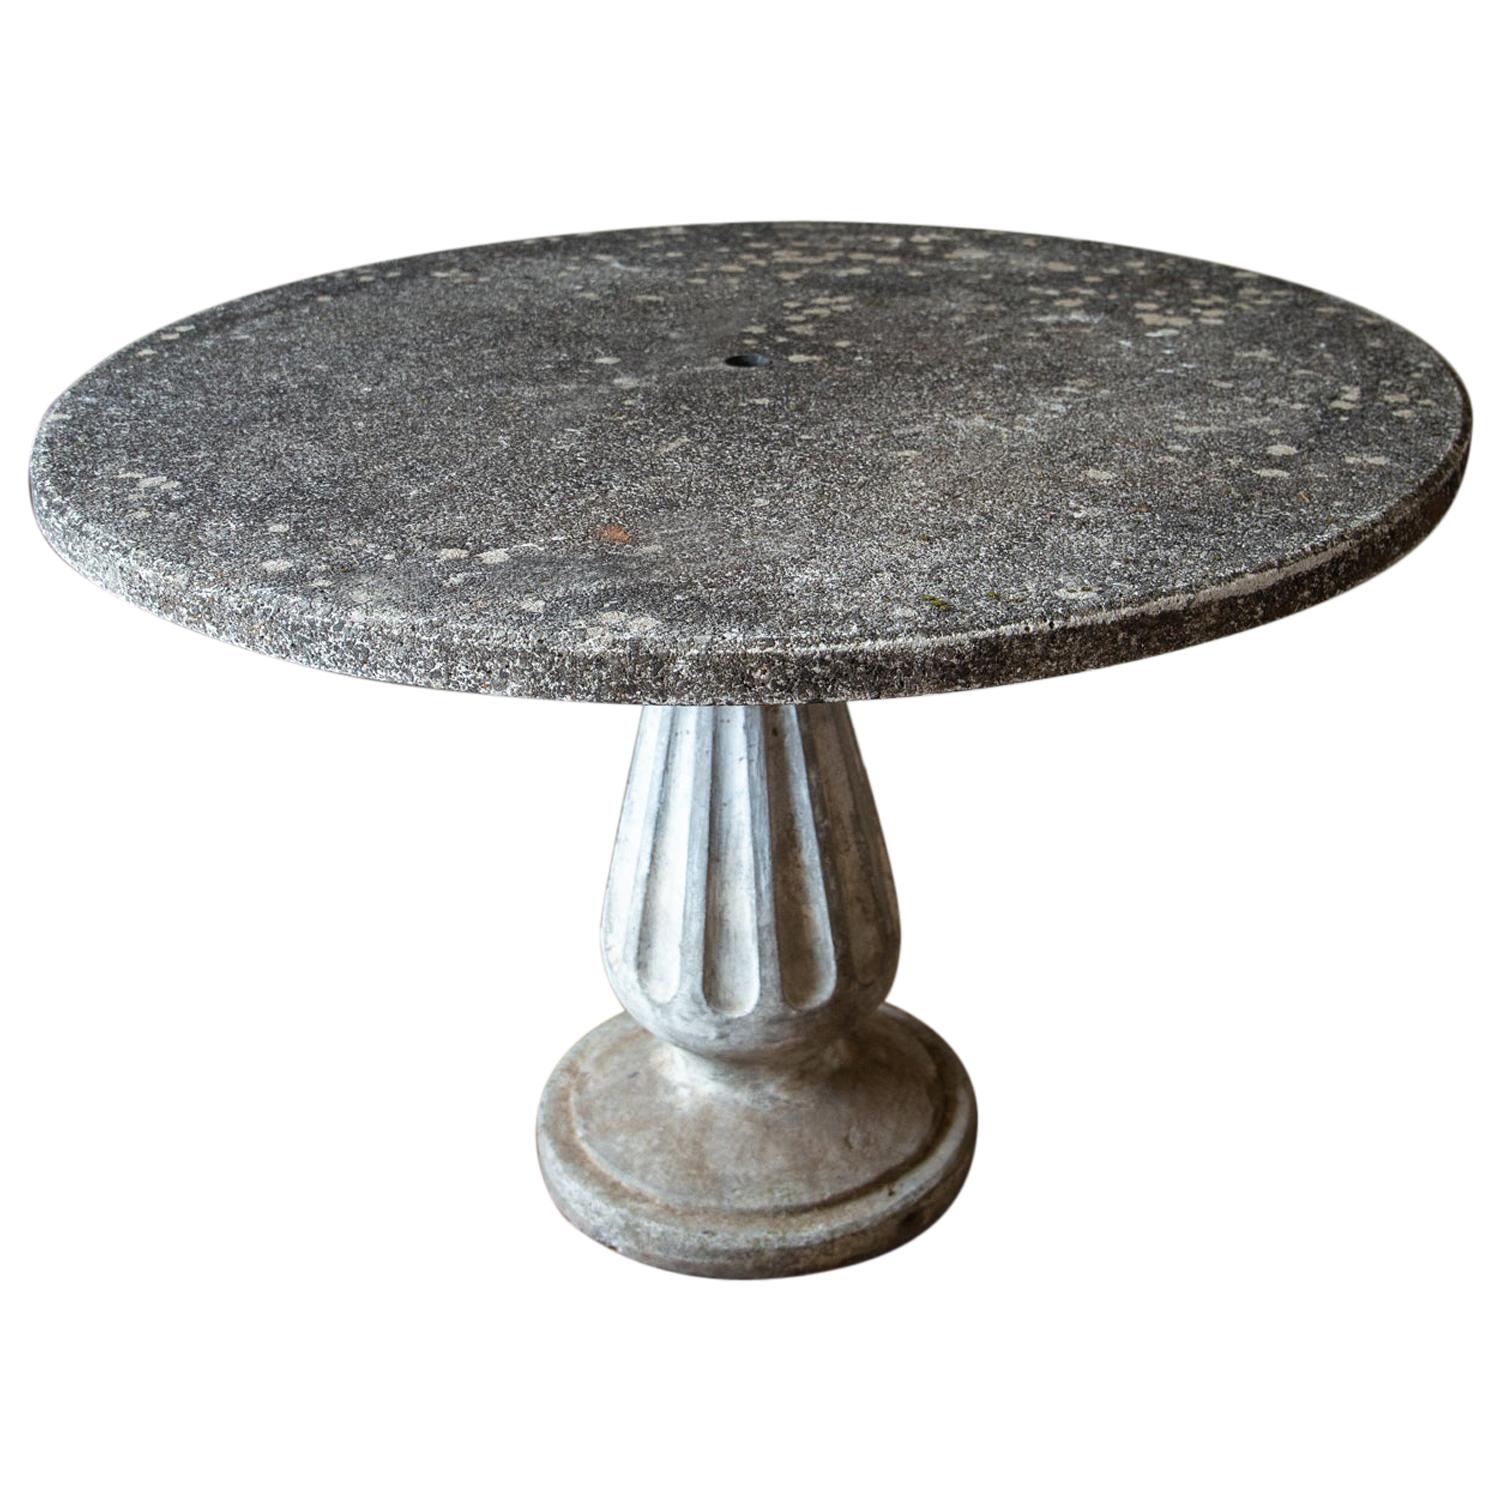 Early French Concrete Brutalist Table with Terrazzo Finish and Fluted Base